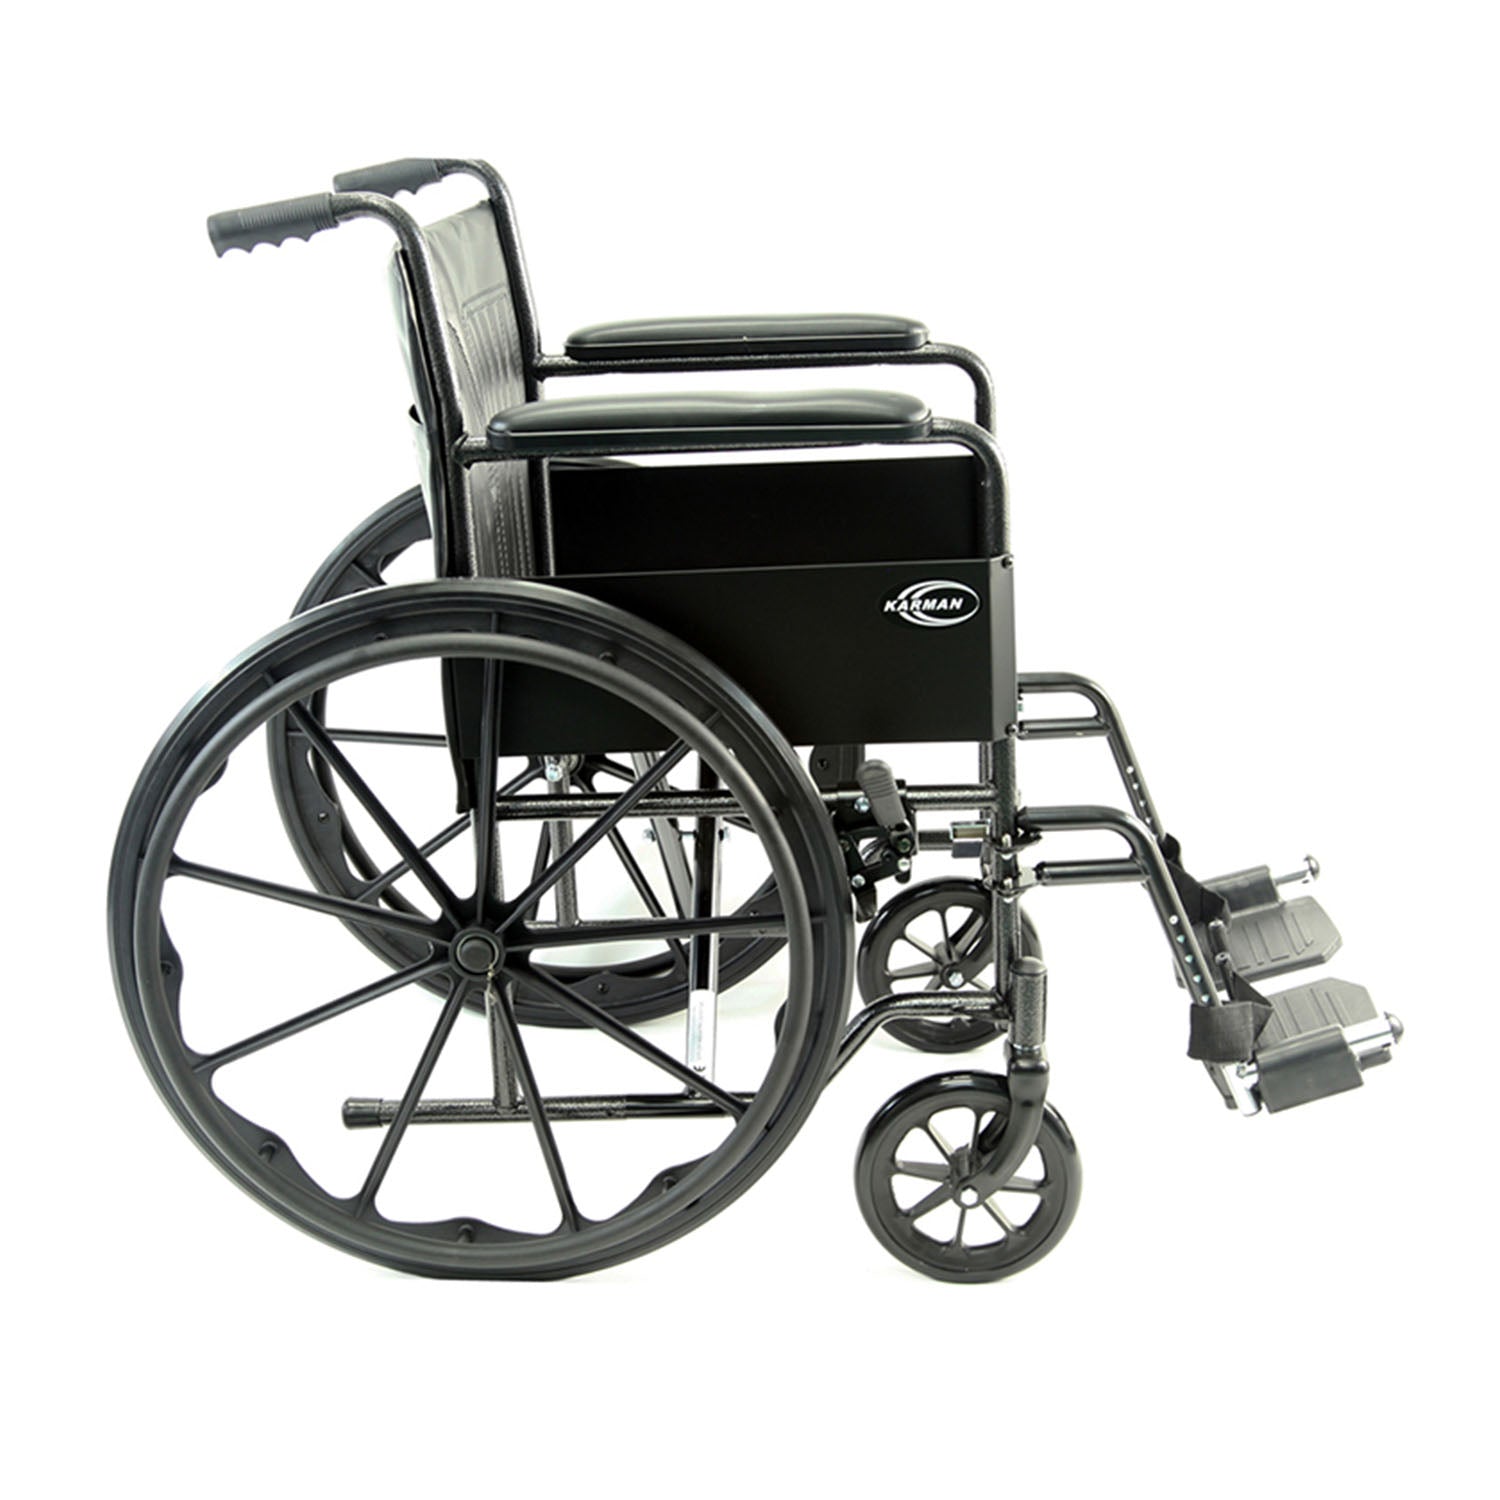 Karman KN-800T 18 inch Seat 37 lbs. Steel Wheelchair with Fixed Armrest